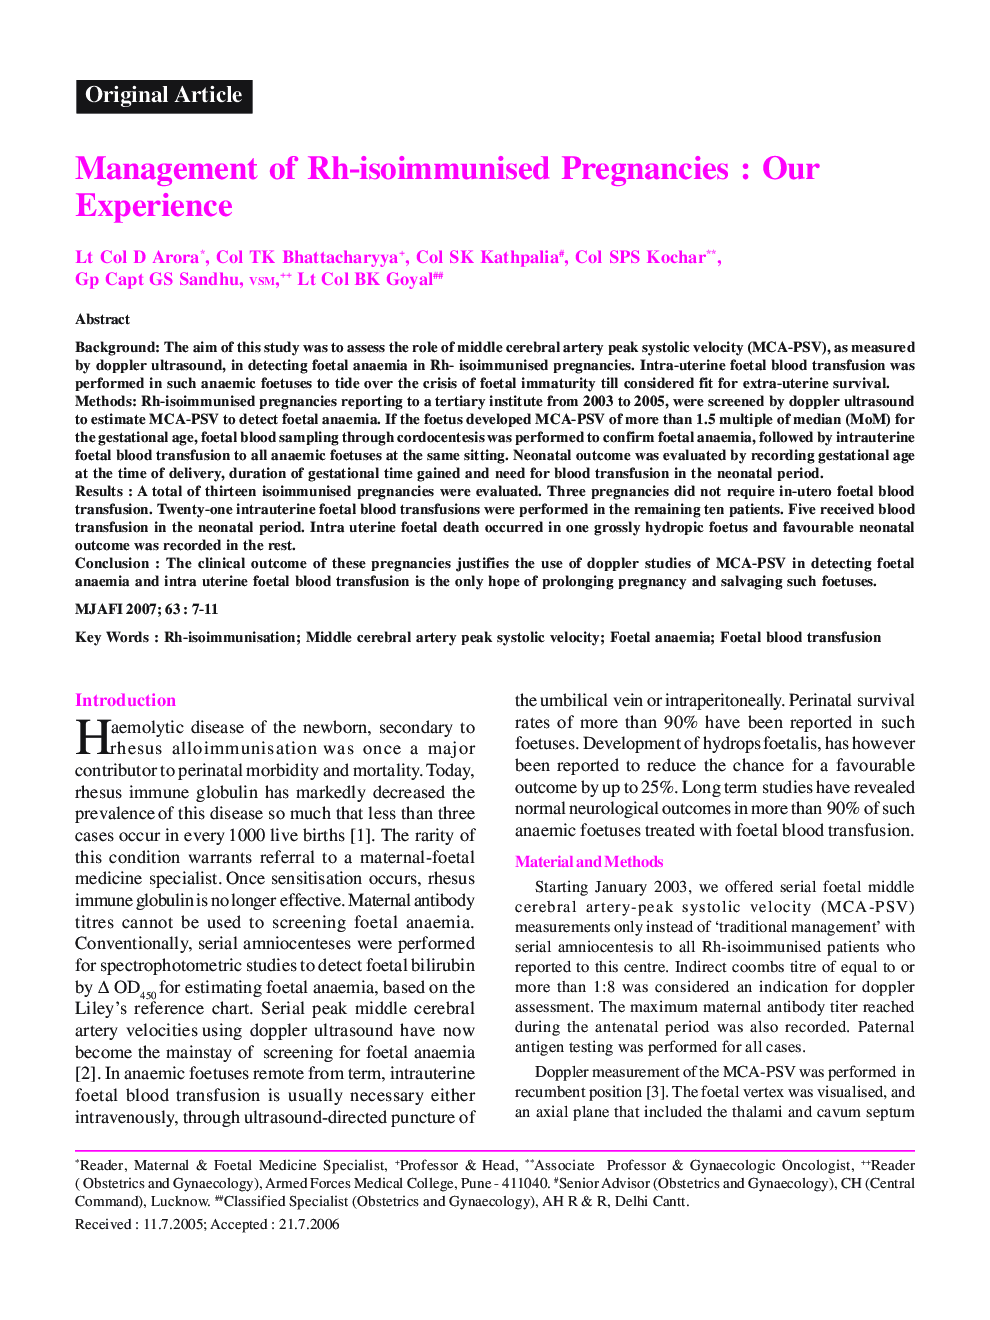 Management of Rh-isoimmunised Pregnancies : Our Experience